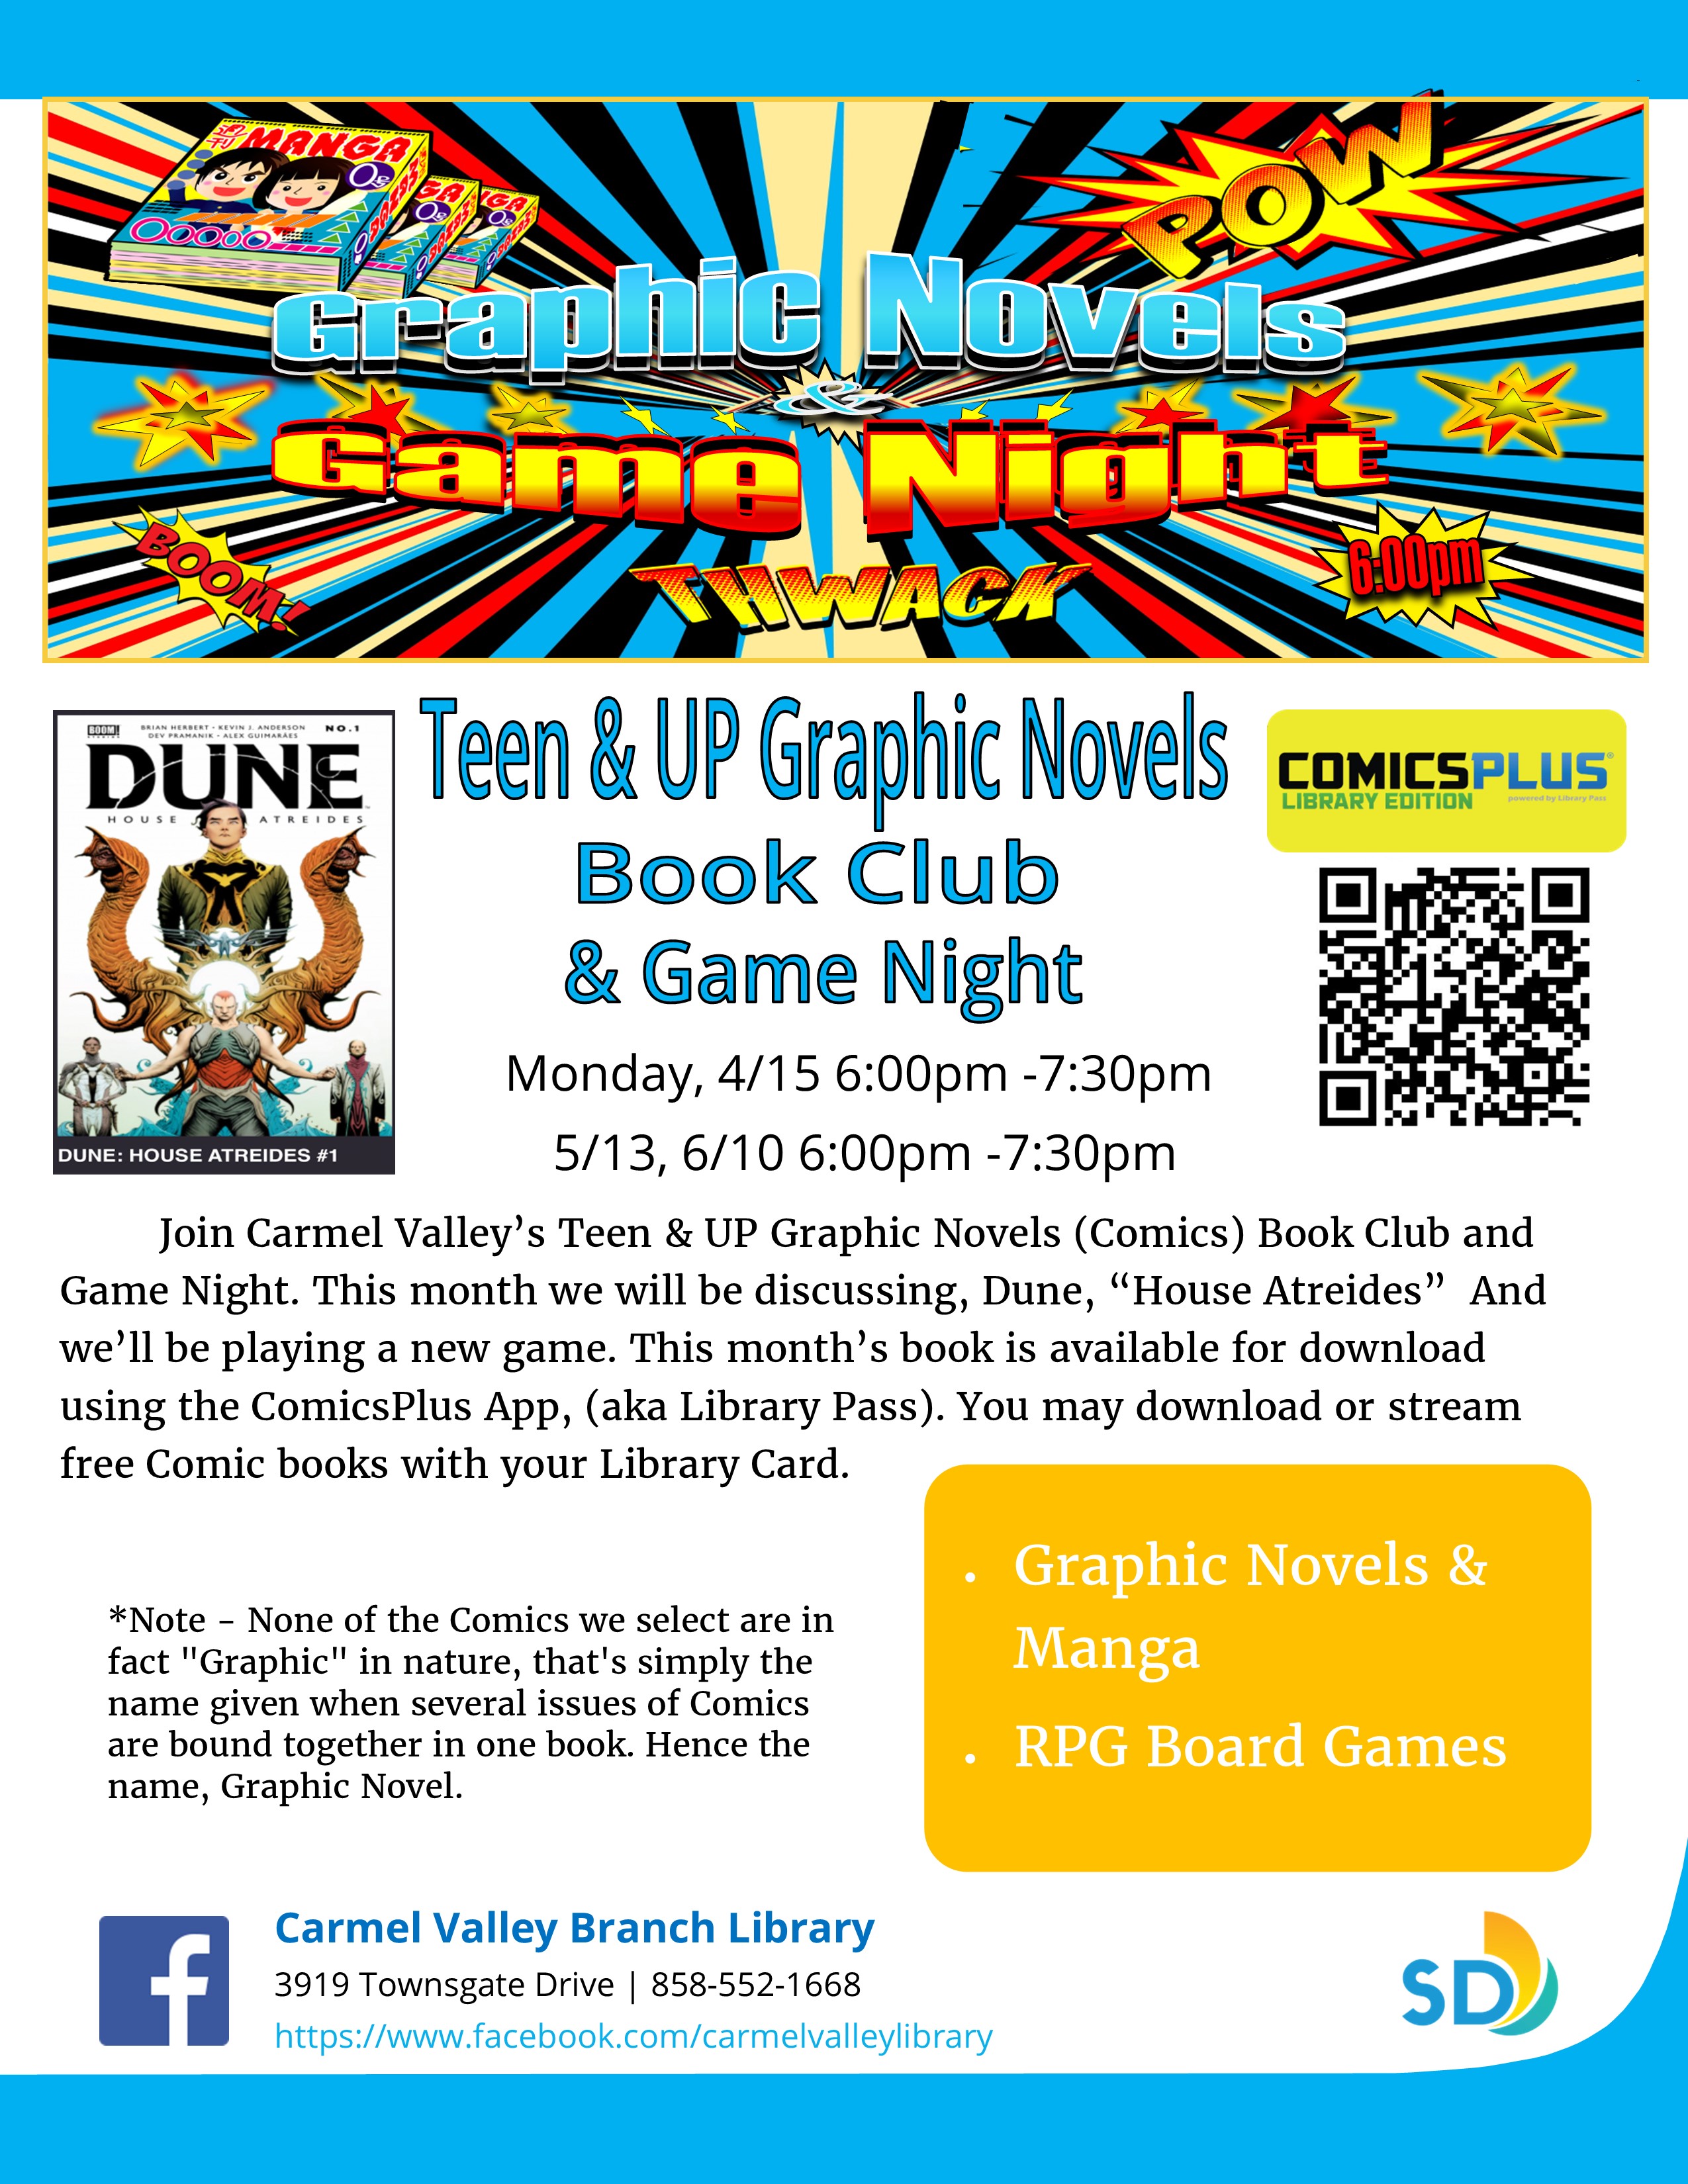 Join Carmel Valley’s Teen & UP Graphic Novels (Comics) Book Club and Game Night. This month we will be discussing, Dune, “House Atreides”  And we’ll be playing a new game. This month’s book is available for download using the ComicsPlus App, (aka Library Pass). You may download or stream free Comic books with your Library Card. 